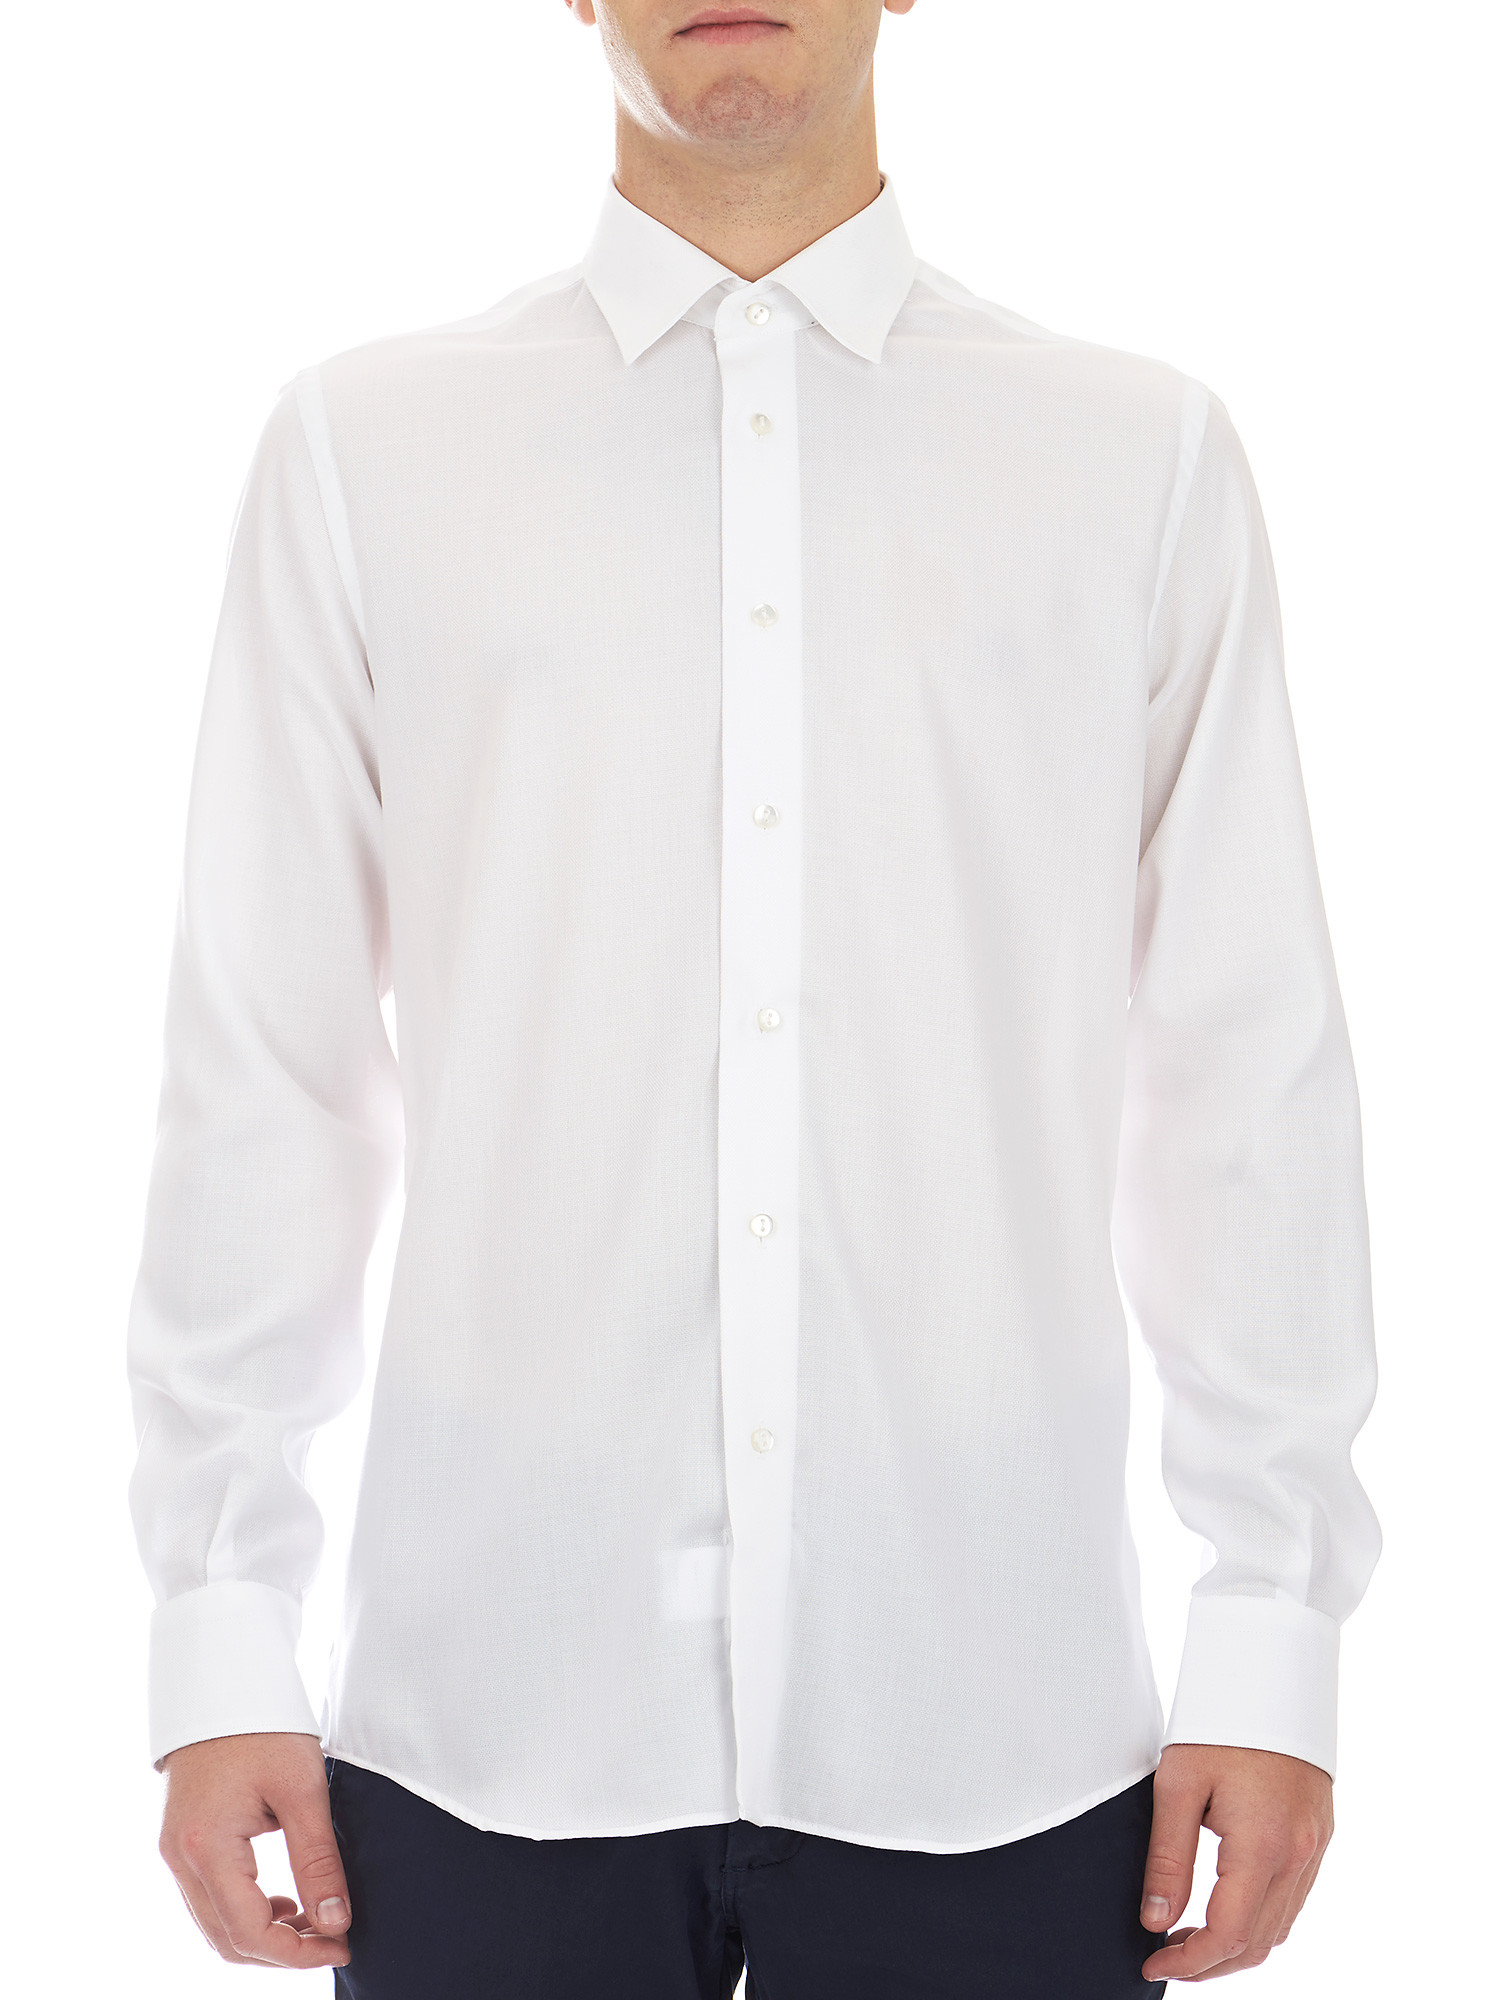 Marcus - White business shirt with no-iron fabric